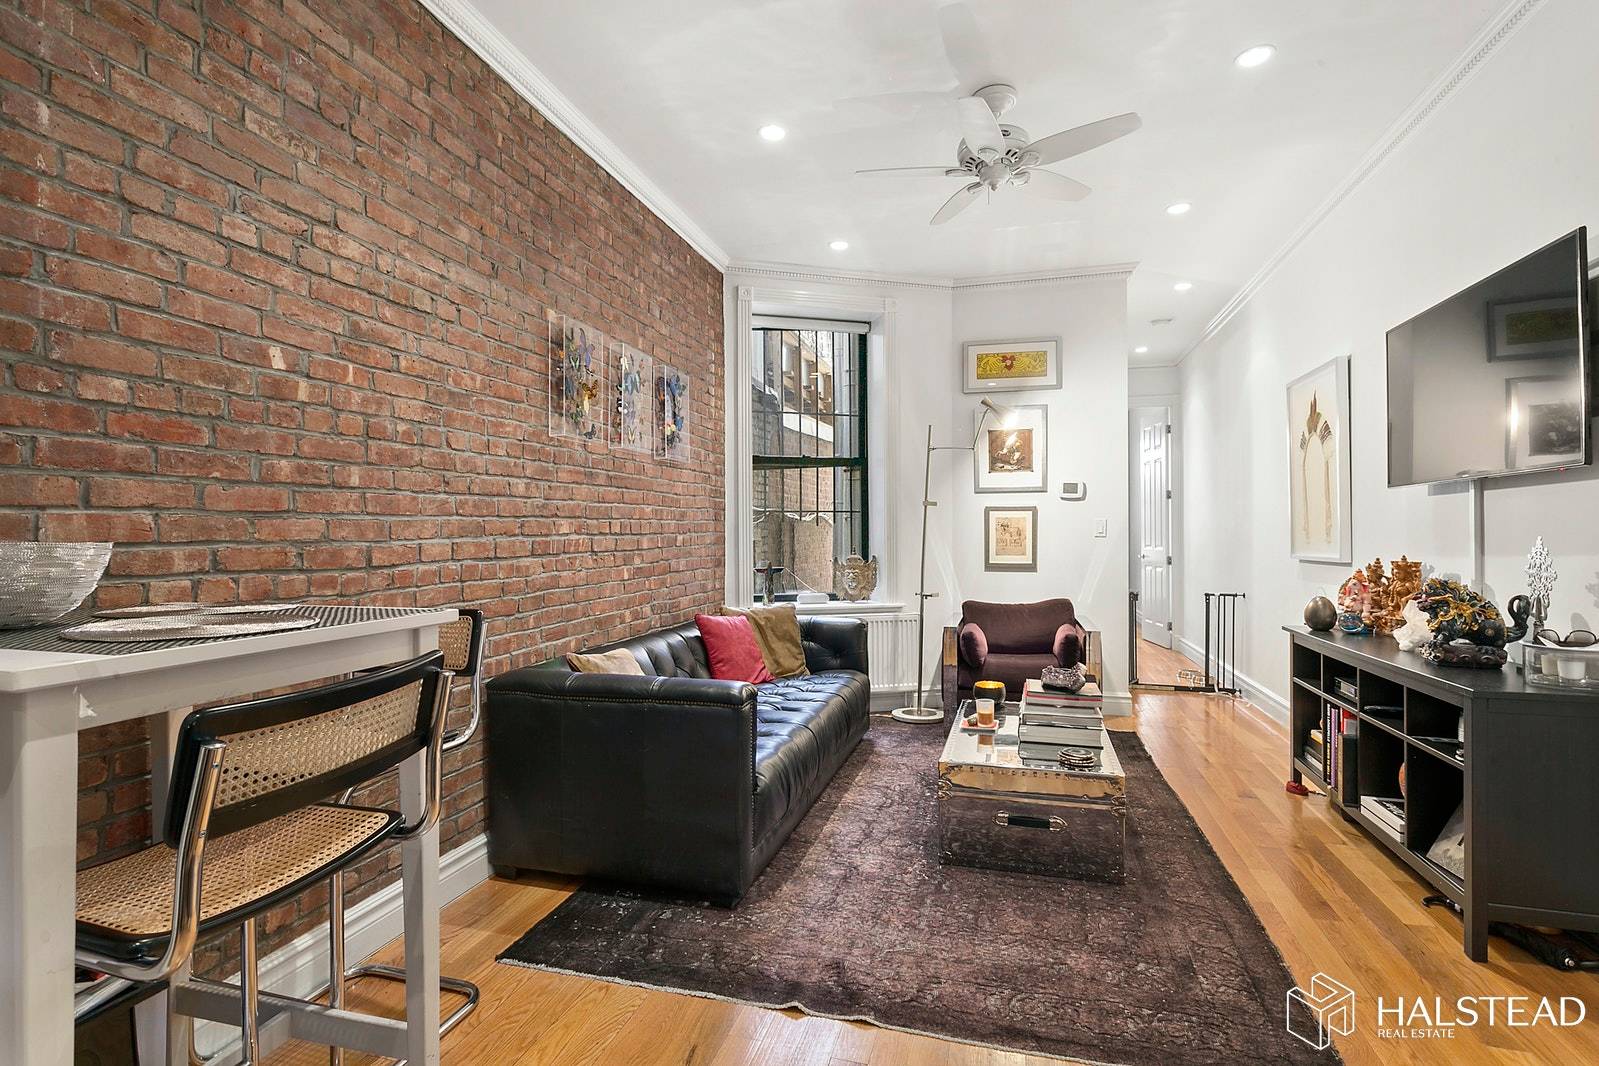 This mint parlor Brownstone 2 bed 2 bath home has been beautifully restored with crown moldings, walnut wood floors, exposed brick, open kitchen with granite counter tops, white cabinets and ...